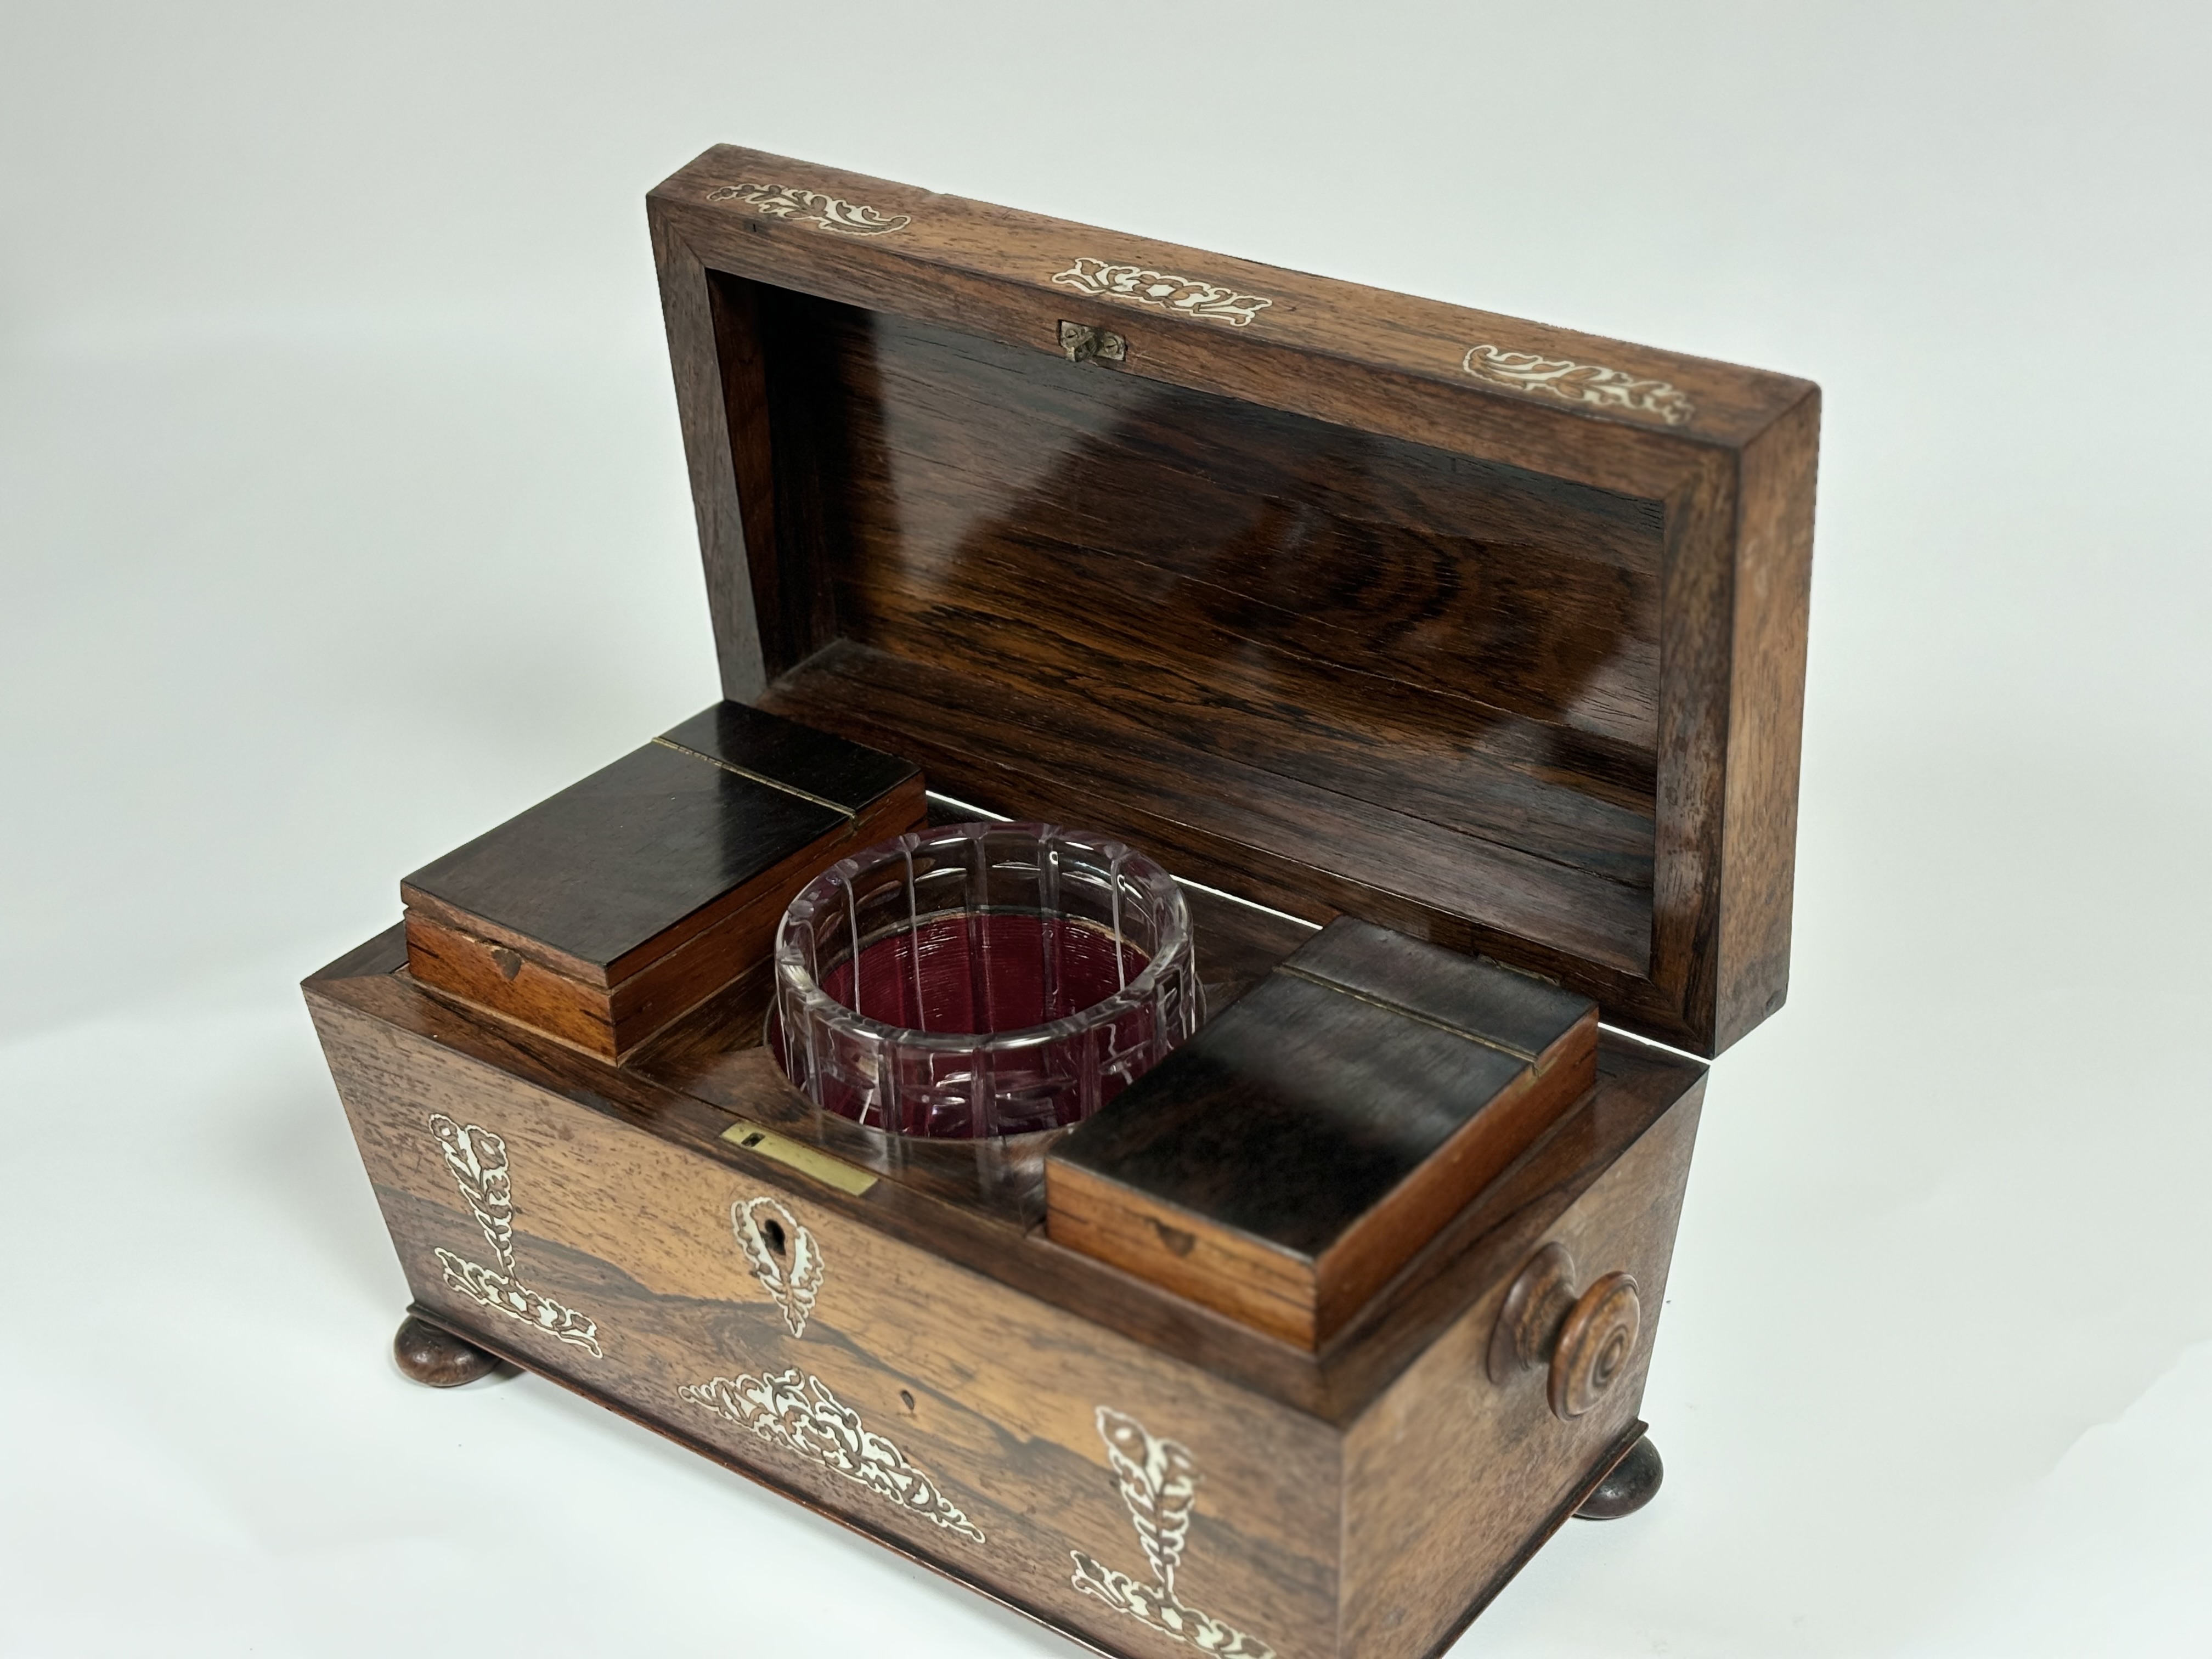 A William IV mother-of-pearl inlaid rosewood tea caddy, of sarcophagus shape, with turned handles - Image 5 of 8